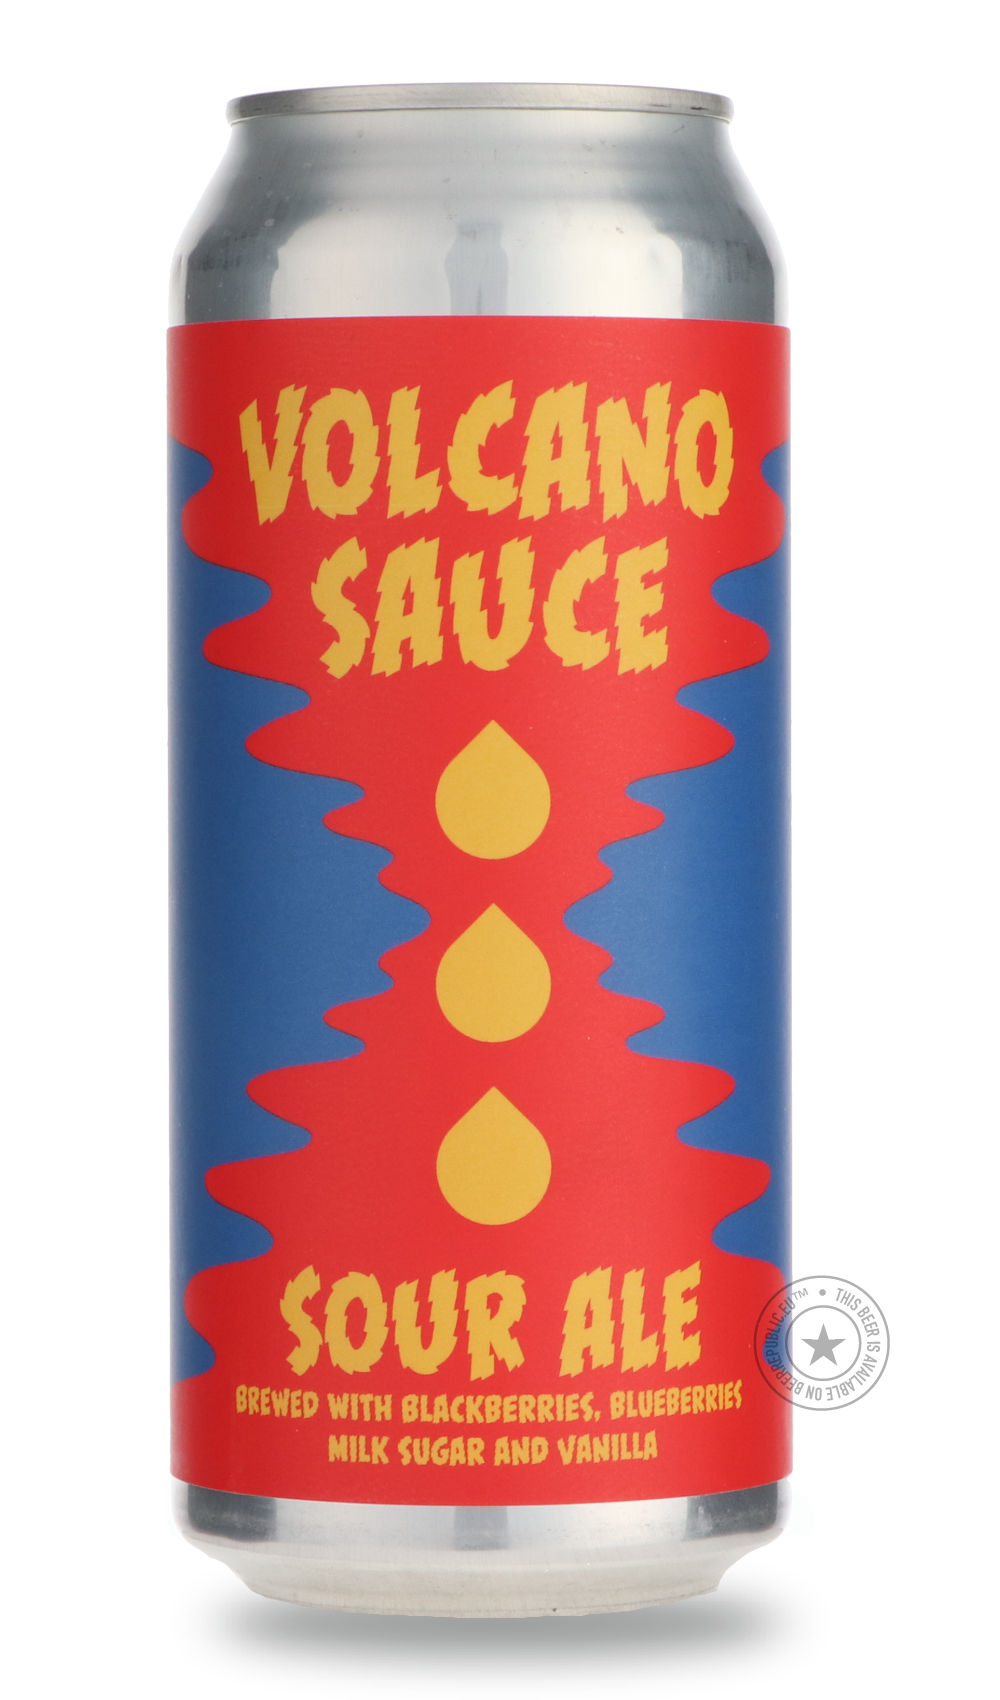 -Aslin- Volcano Sauce / Fuerst Wiacek-Sour / Wild & Fruity- Only @ Beer Republic - The best online beer store for American & Canadian craft beer - Buy beer online from the USA and Canada - Bier online kopen - Amerikaans bier kopen - Craft beer store - Craft beer kopen - Amerikanisch bier kaufen - Bier online kaufen - Acheter biere online - IPA - Stout - Porter - New England IPA - Hazy IPA - Imperial Stout - Barrel Aged - Barrel Aged Imperial Stout - Brown - Dark beer - Blond - Blonde - Pilsner - Lager - Whe